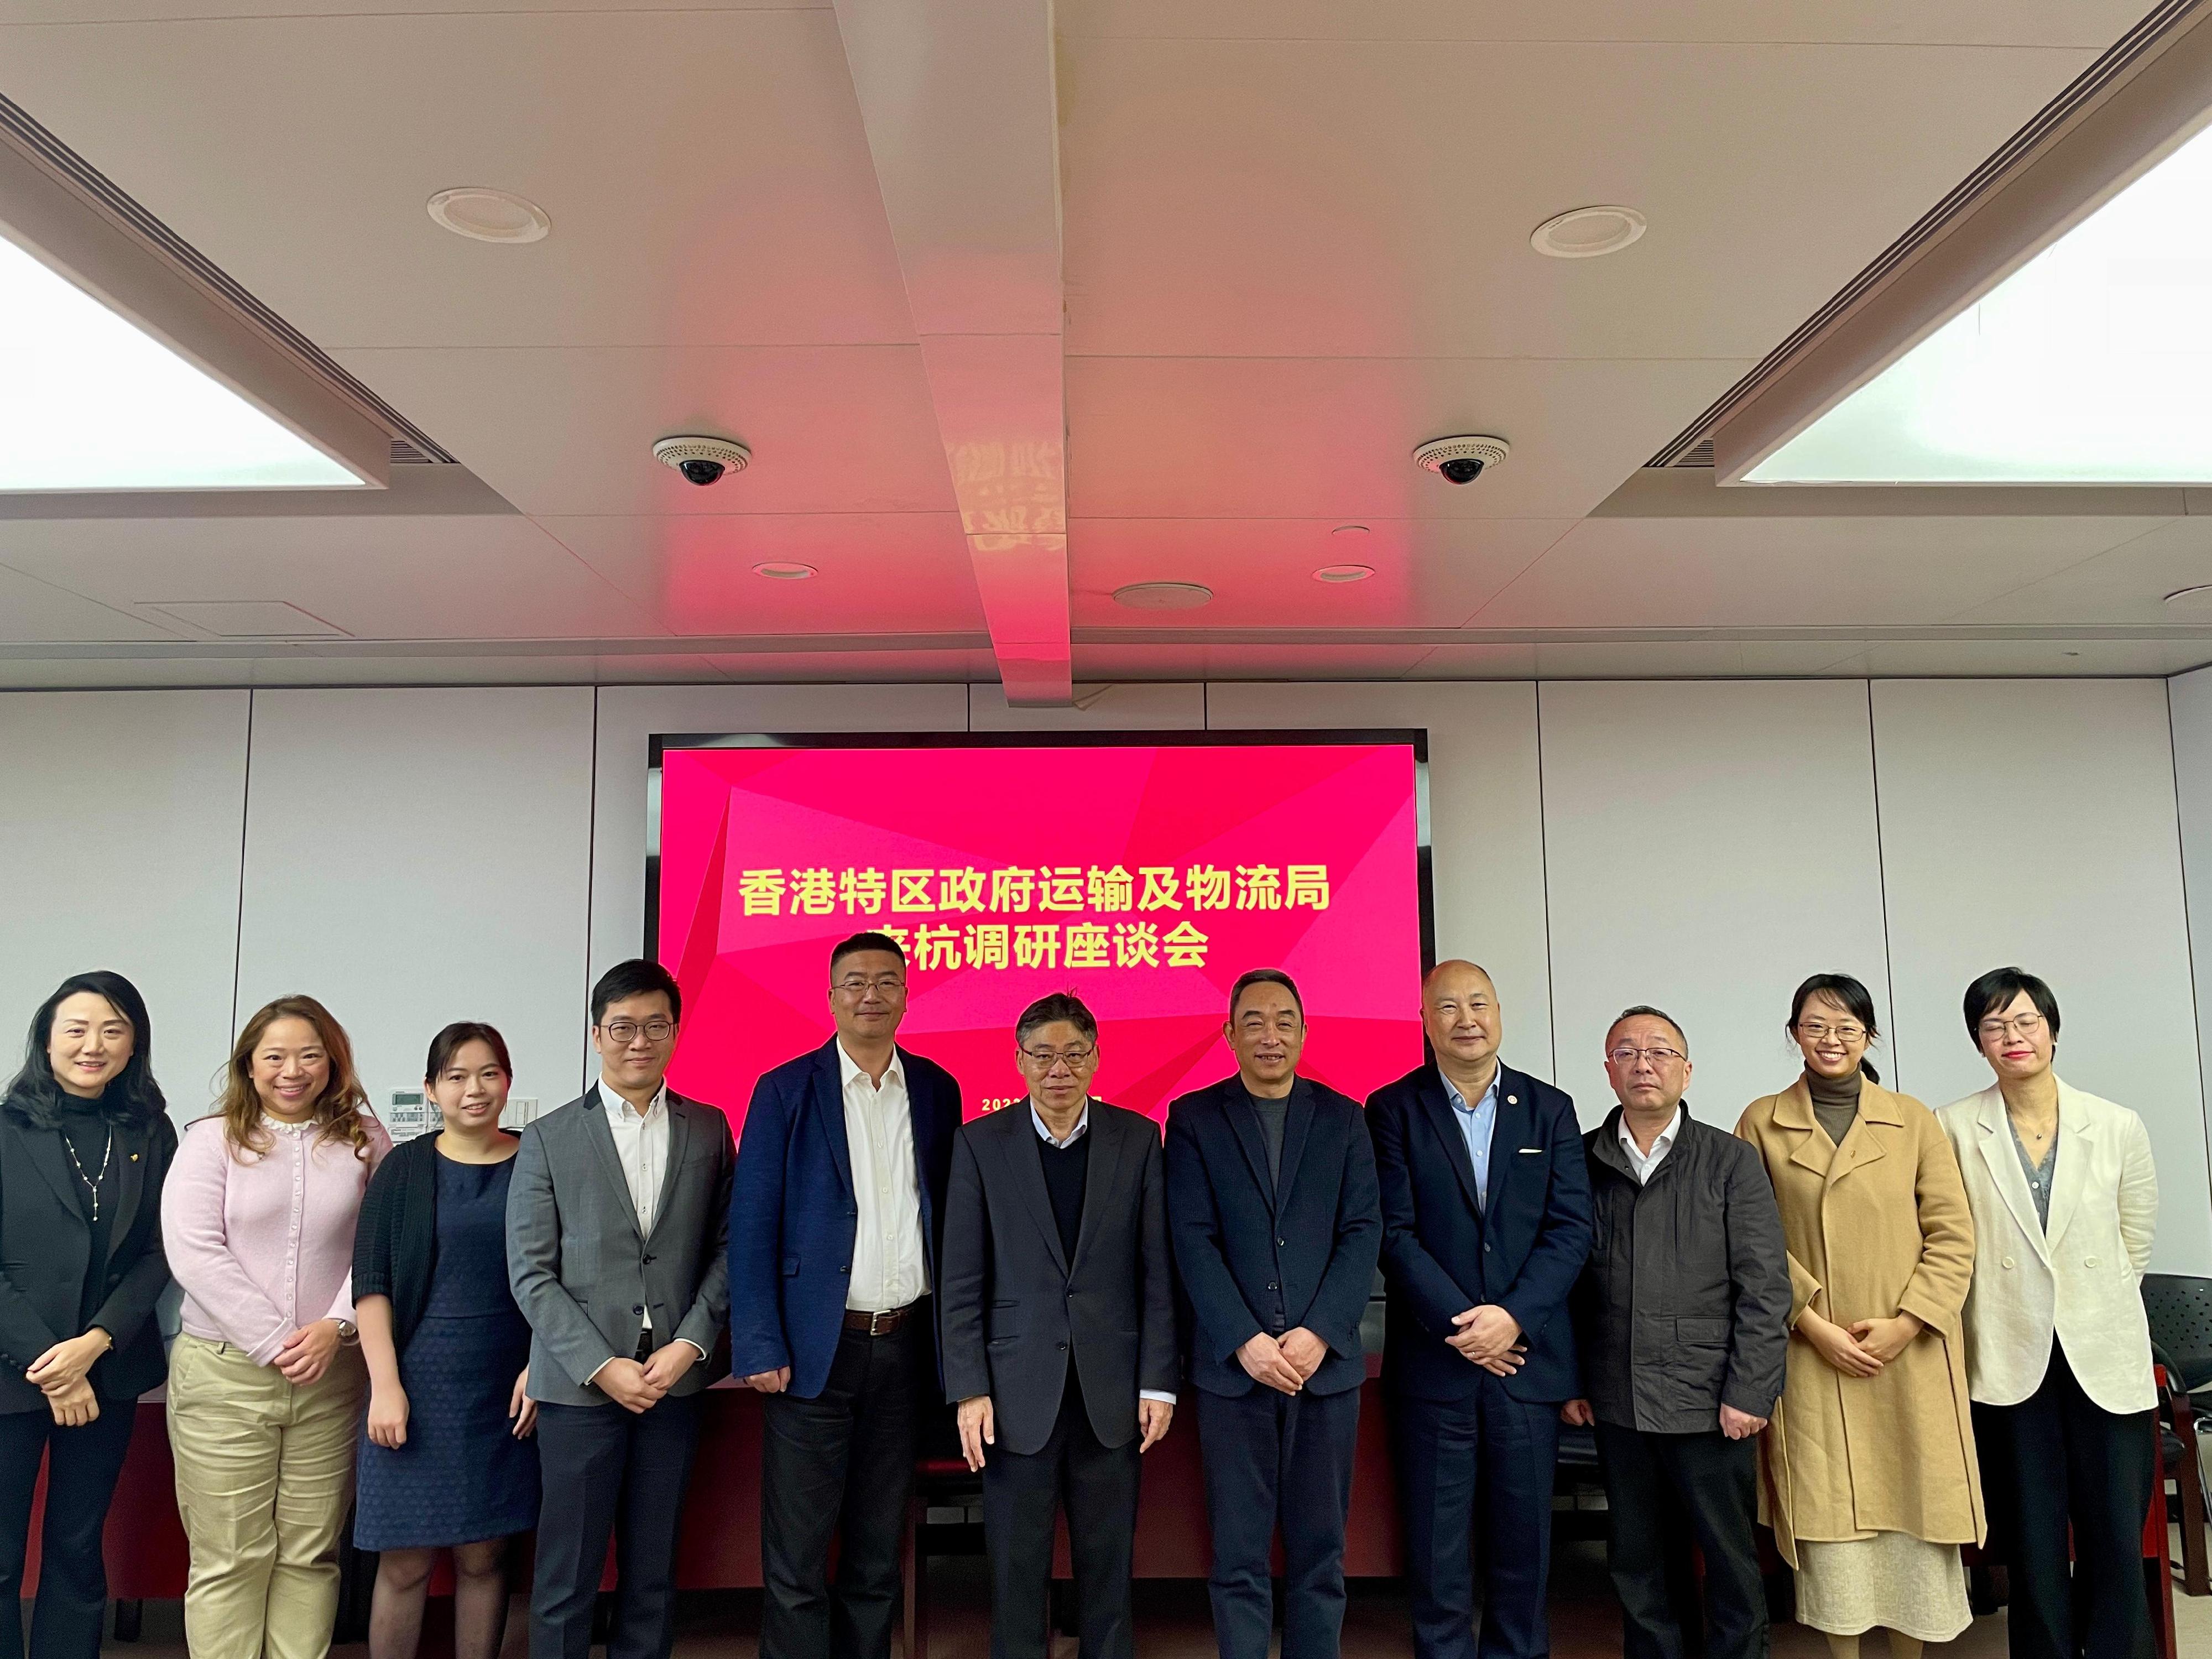 The Secretary for Transport and Logistics, Mr Lam Sai-hung, learned about the latest developments in transport policies in Hangzhou today (December 7). Photo shows Mr Lam (centre) with the Director General of the Hong Kong and Macao Affairs Office of the Hangzhou Municipal People's Government, Mr Jin Heng (fifth right), and other representatives.